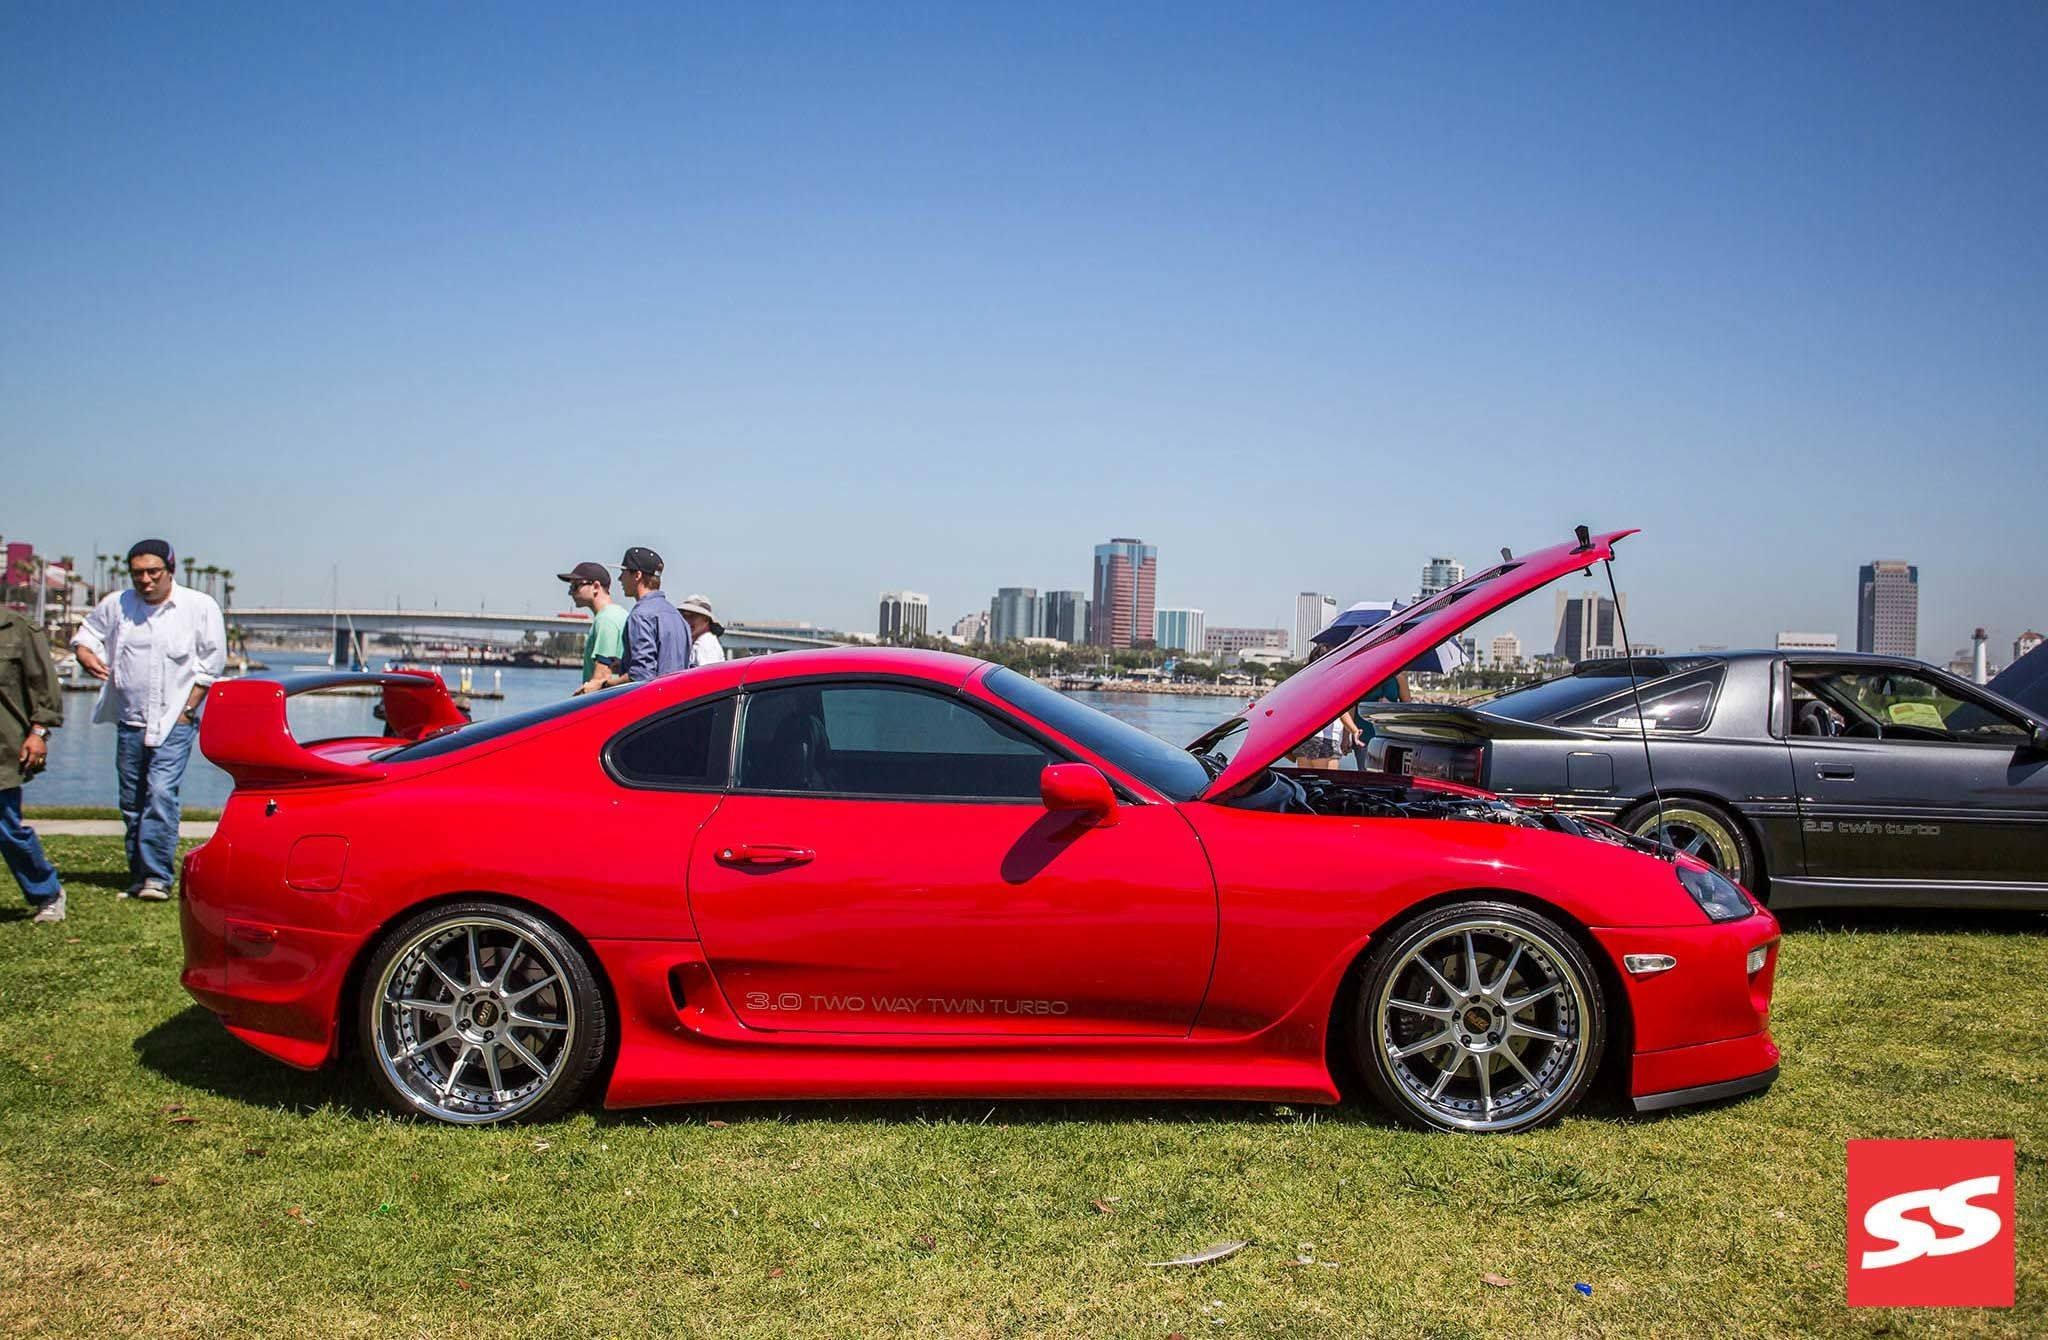 General 2048x1340 car Toyota Supra Toyota red cars vehicle car meets Japanese cars